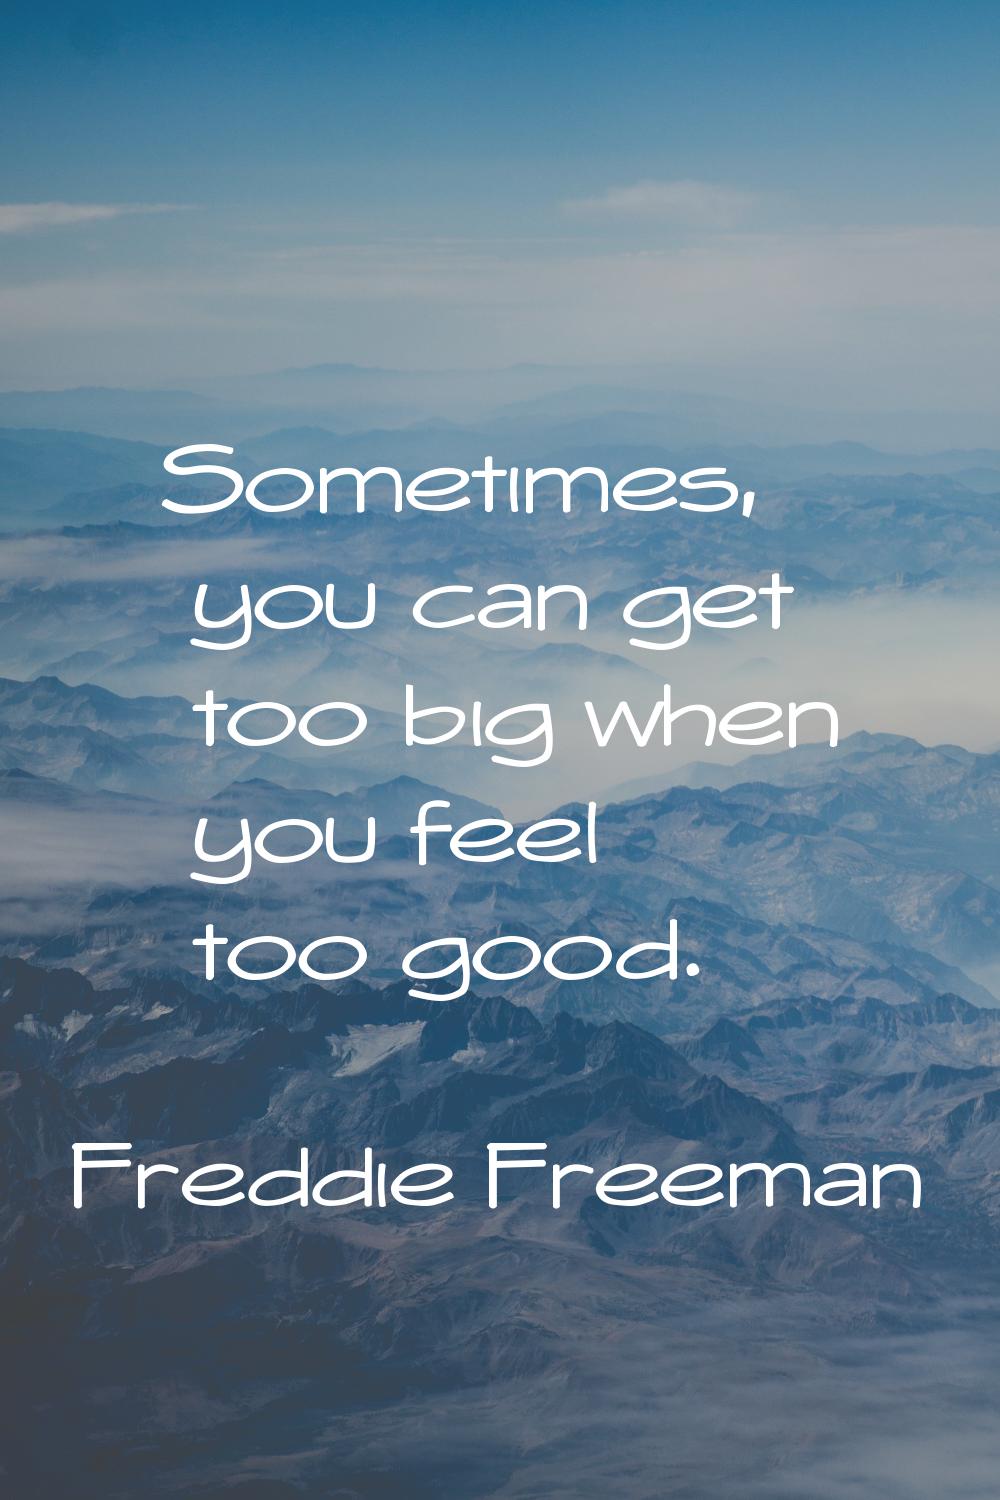 Sometimes, you can get too big when you feel too good.